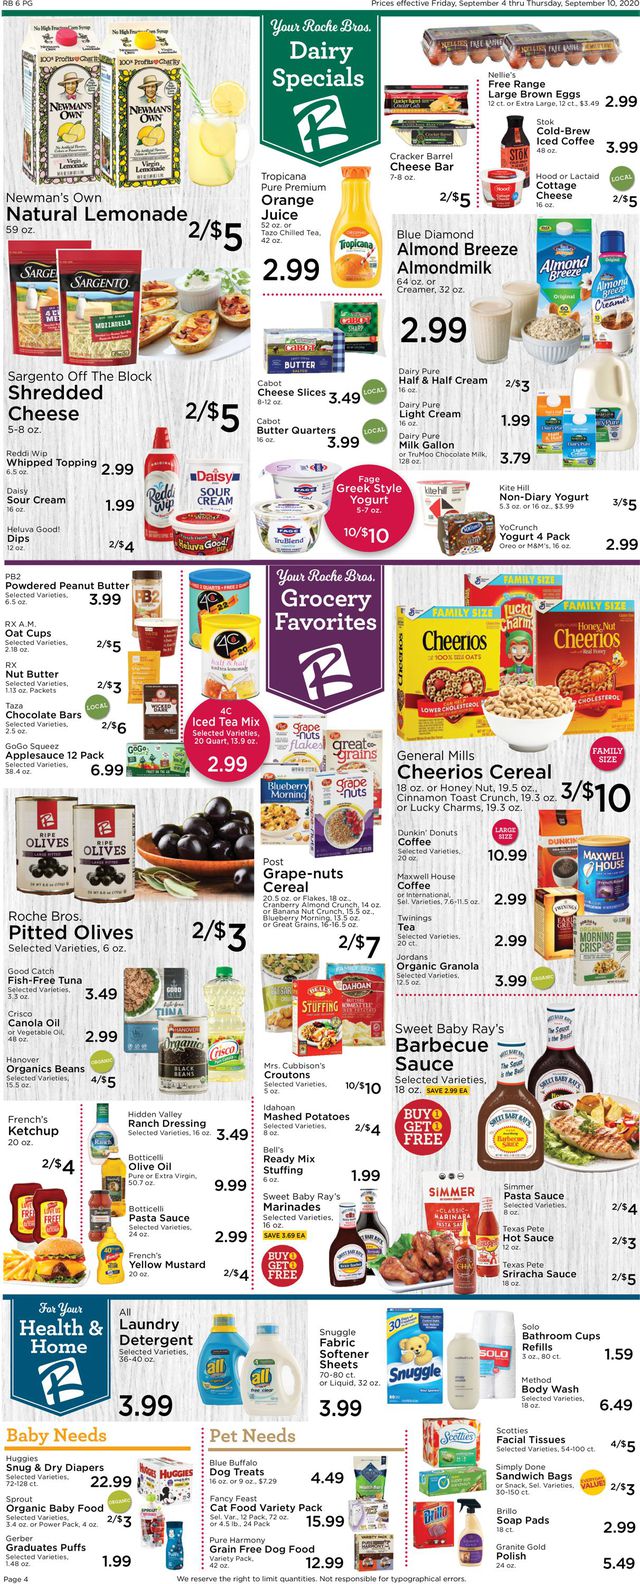 Roche Bros. Supermarkets Ad from 09/04/2020